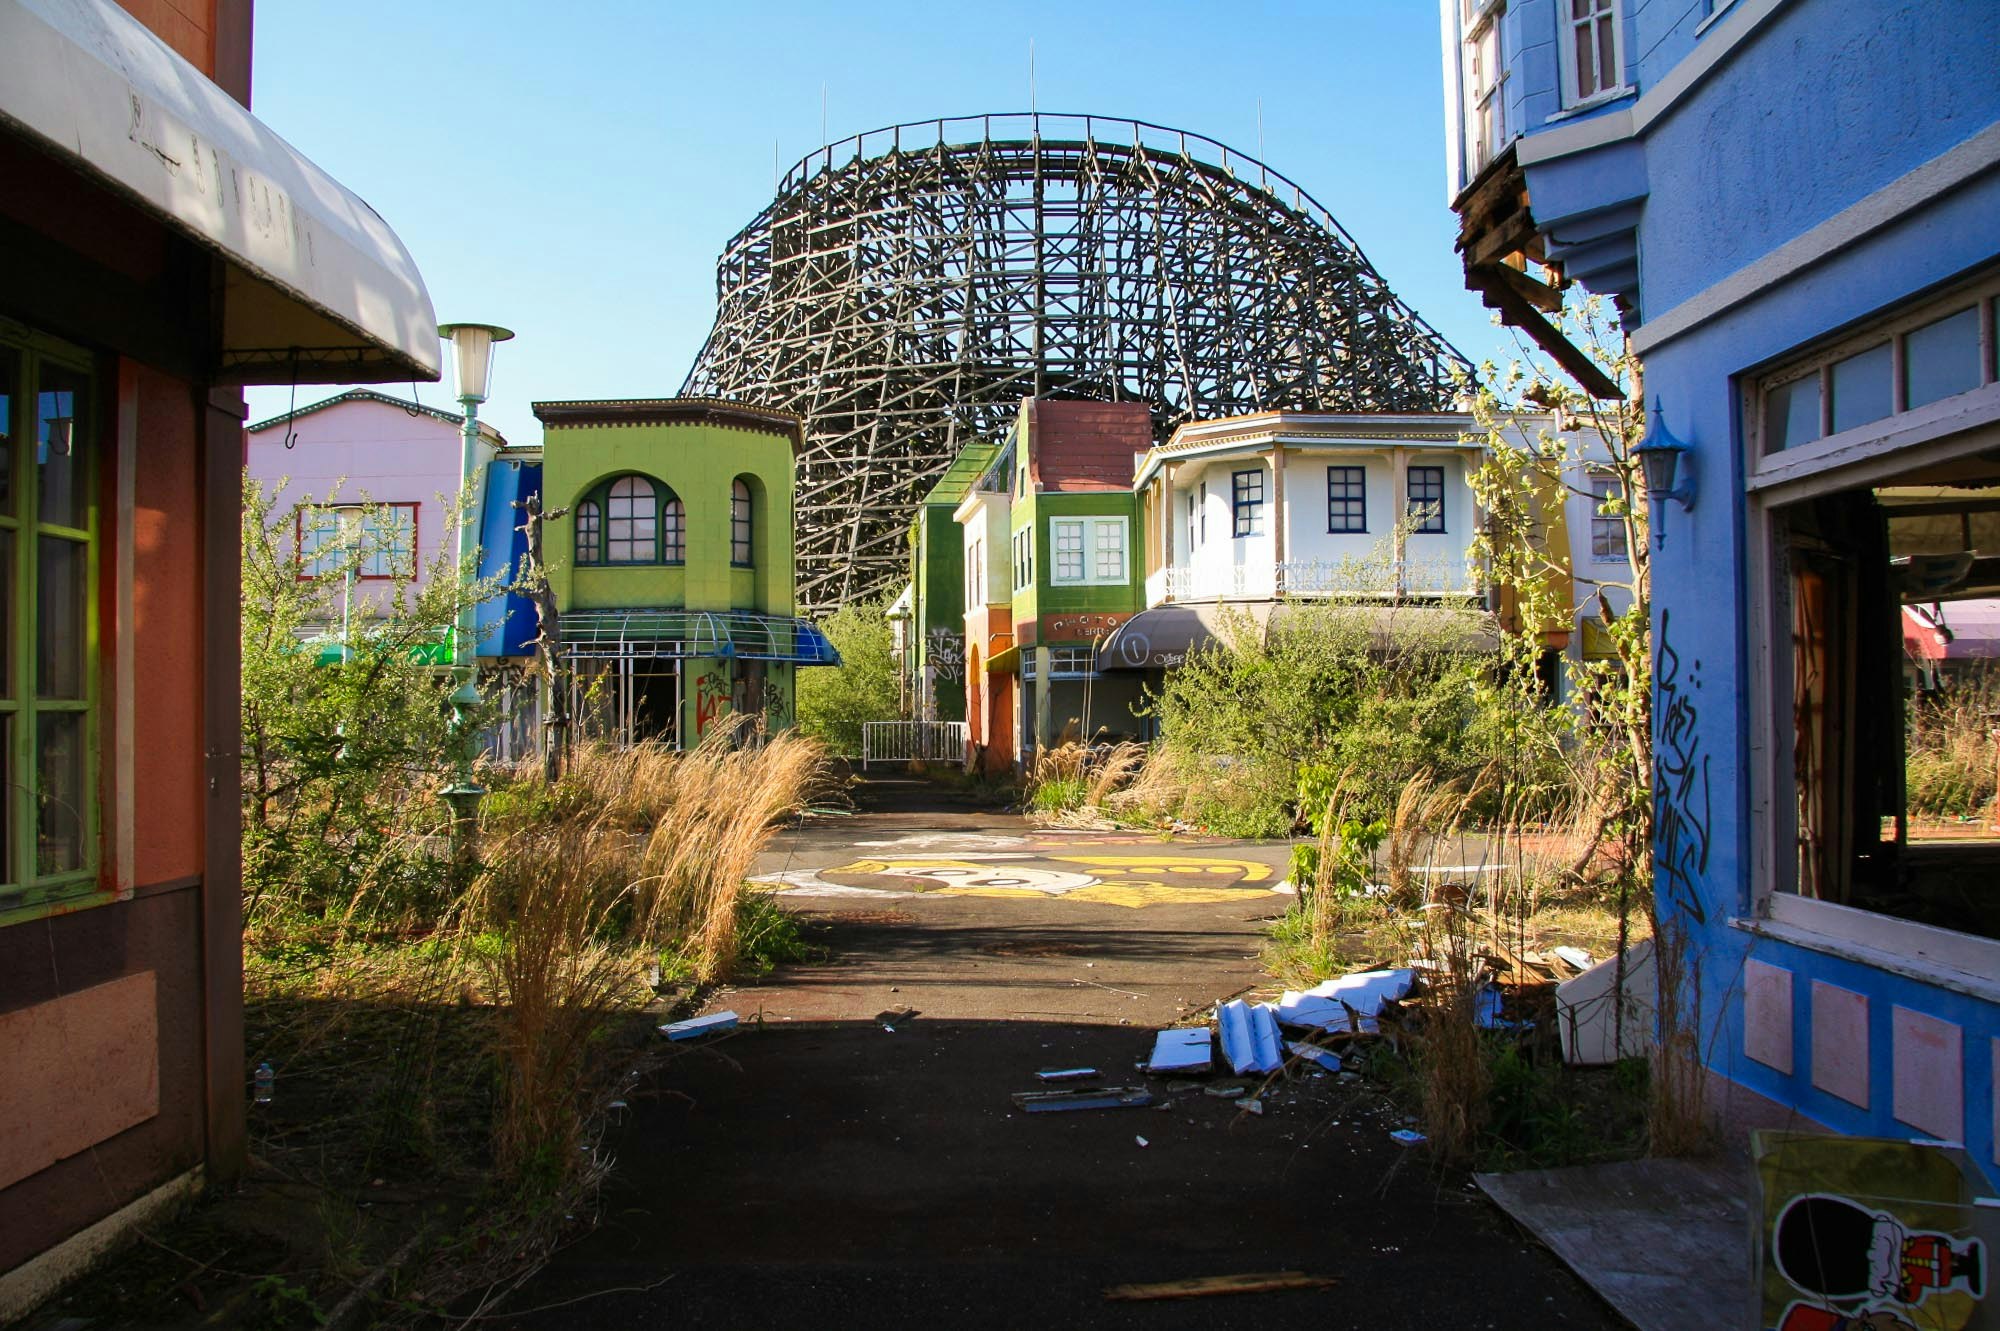 Mainstreet of Nara Dreamland which lay forgotten and abandoned